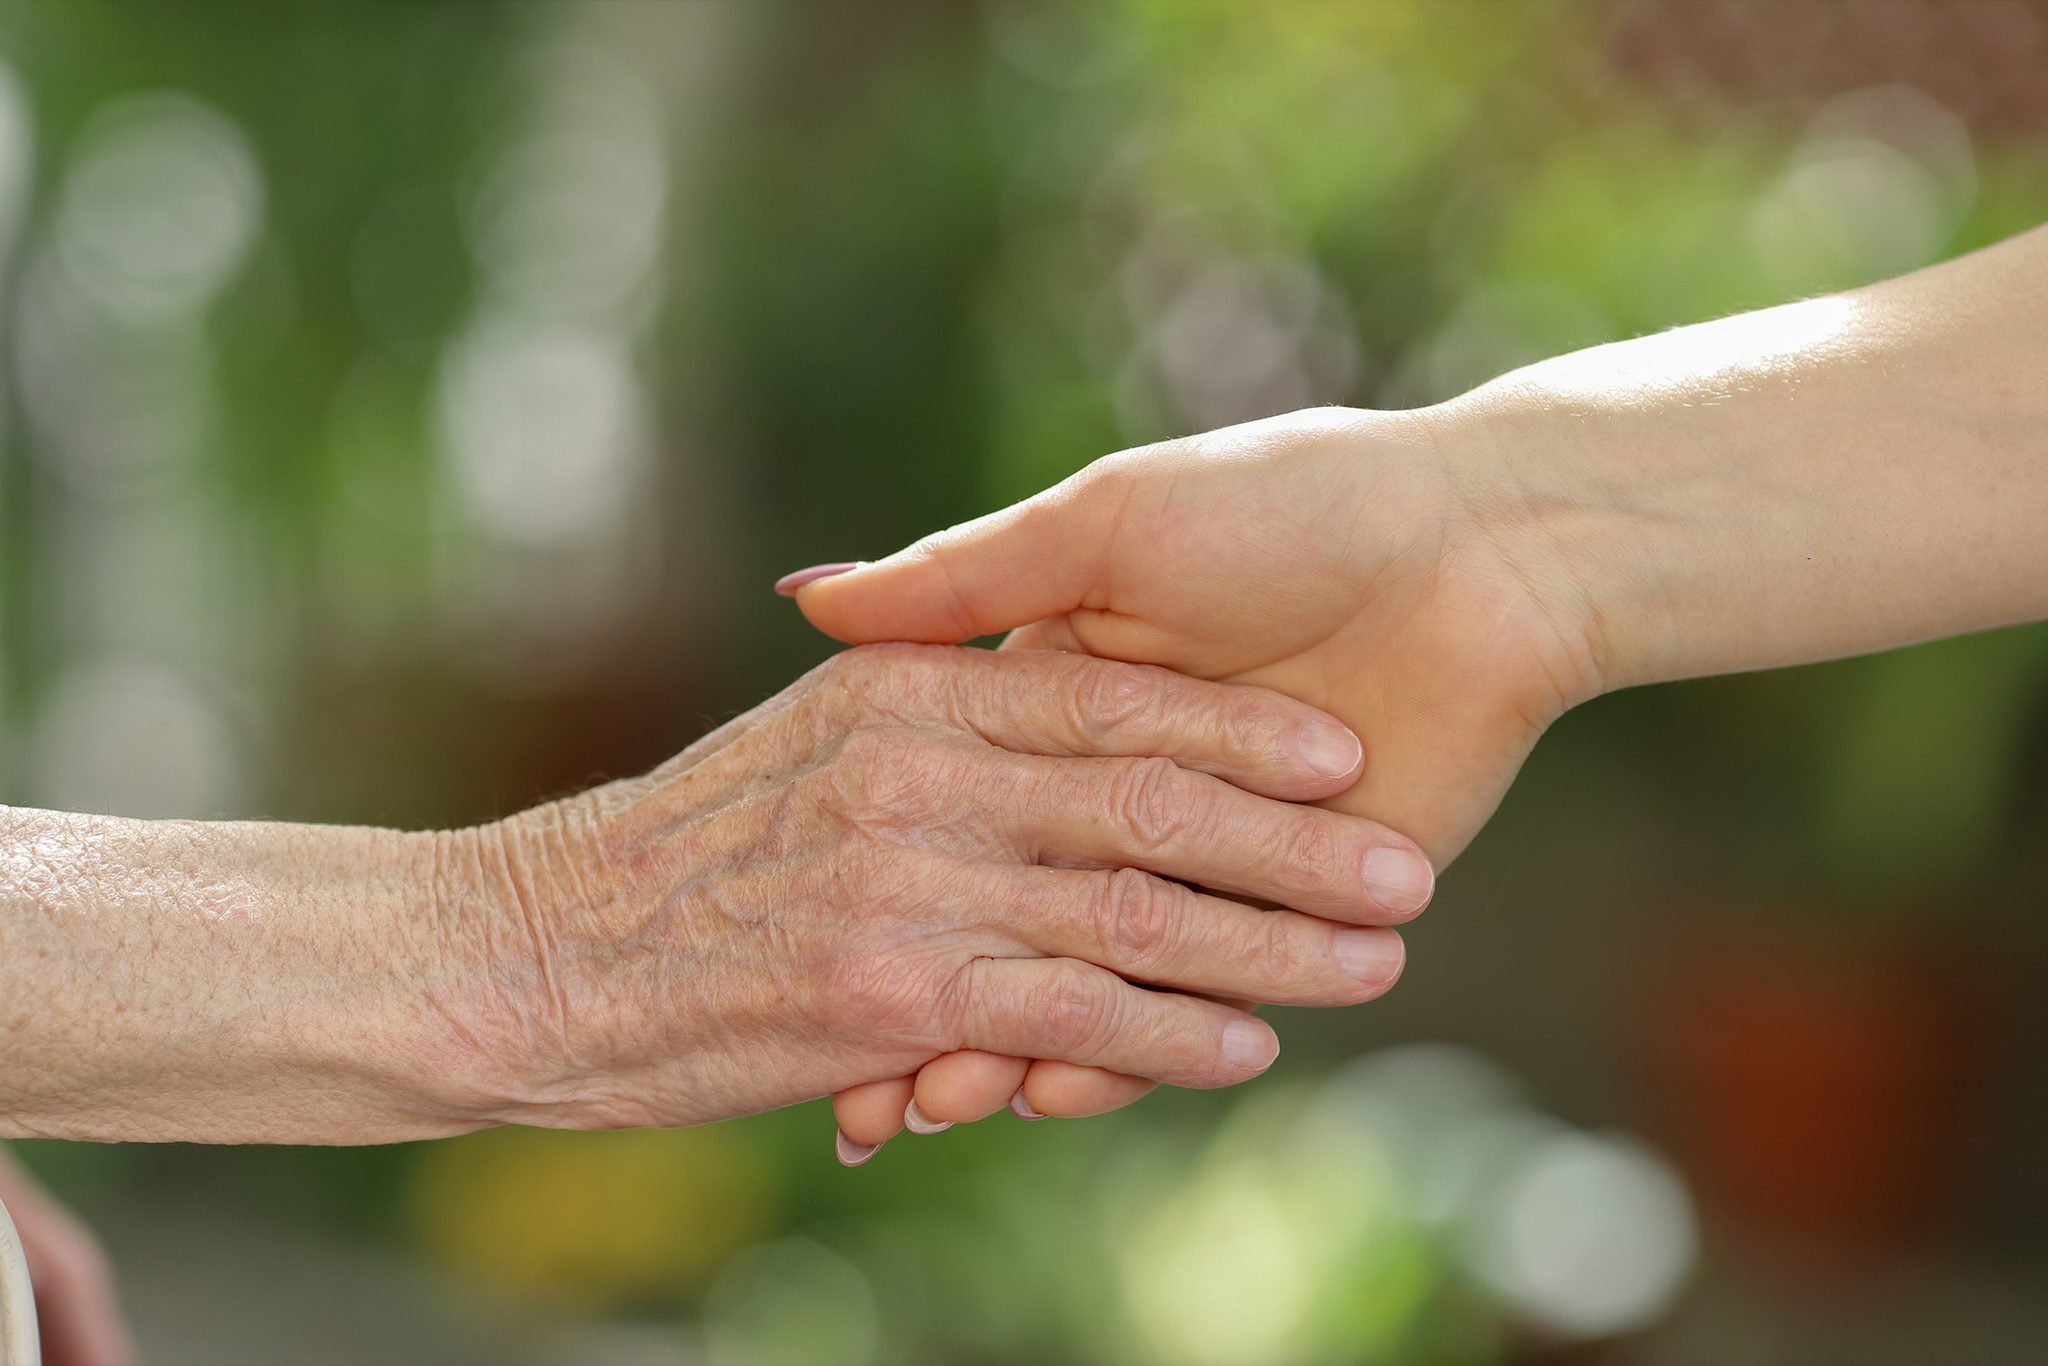 Hospice or Palliative Care: What’s in a Name?